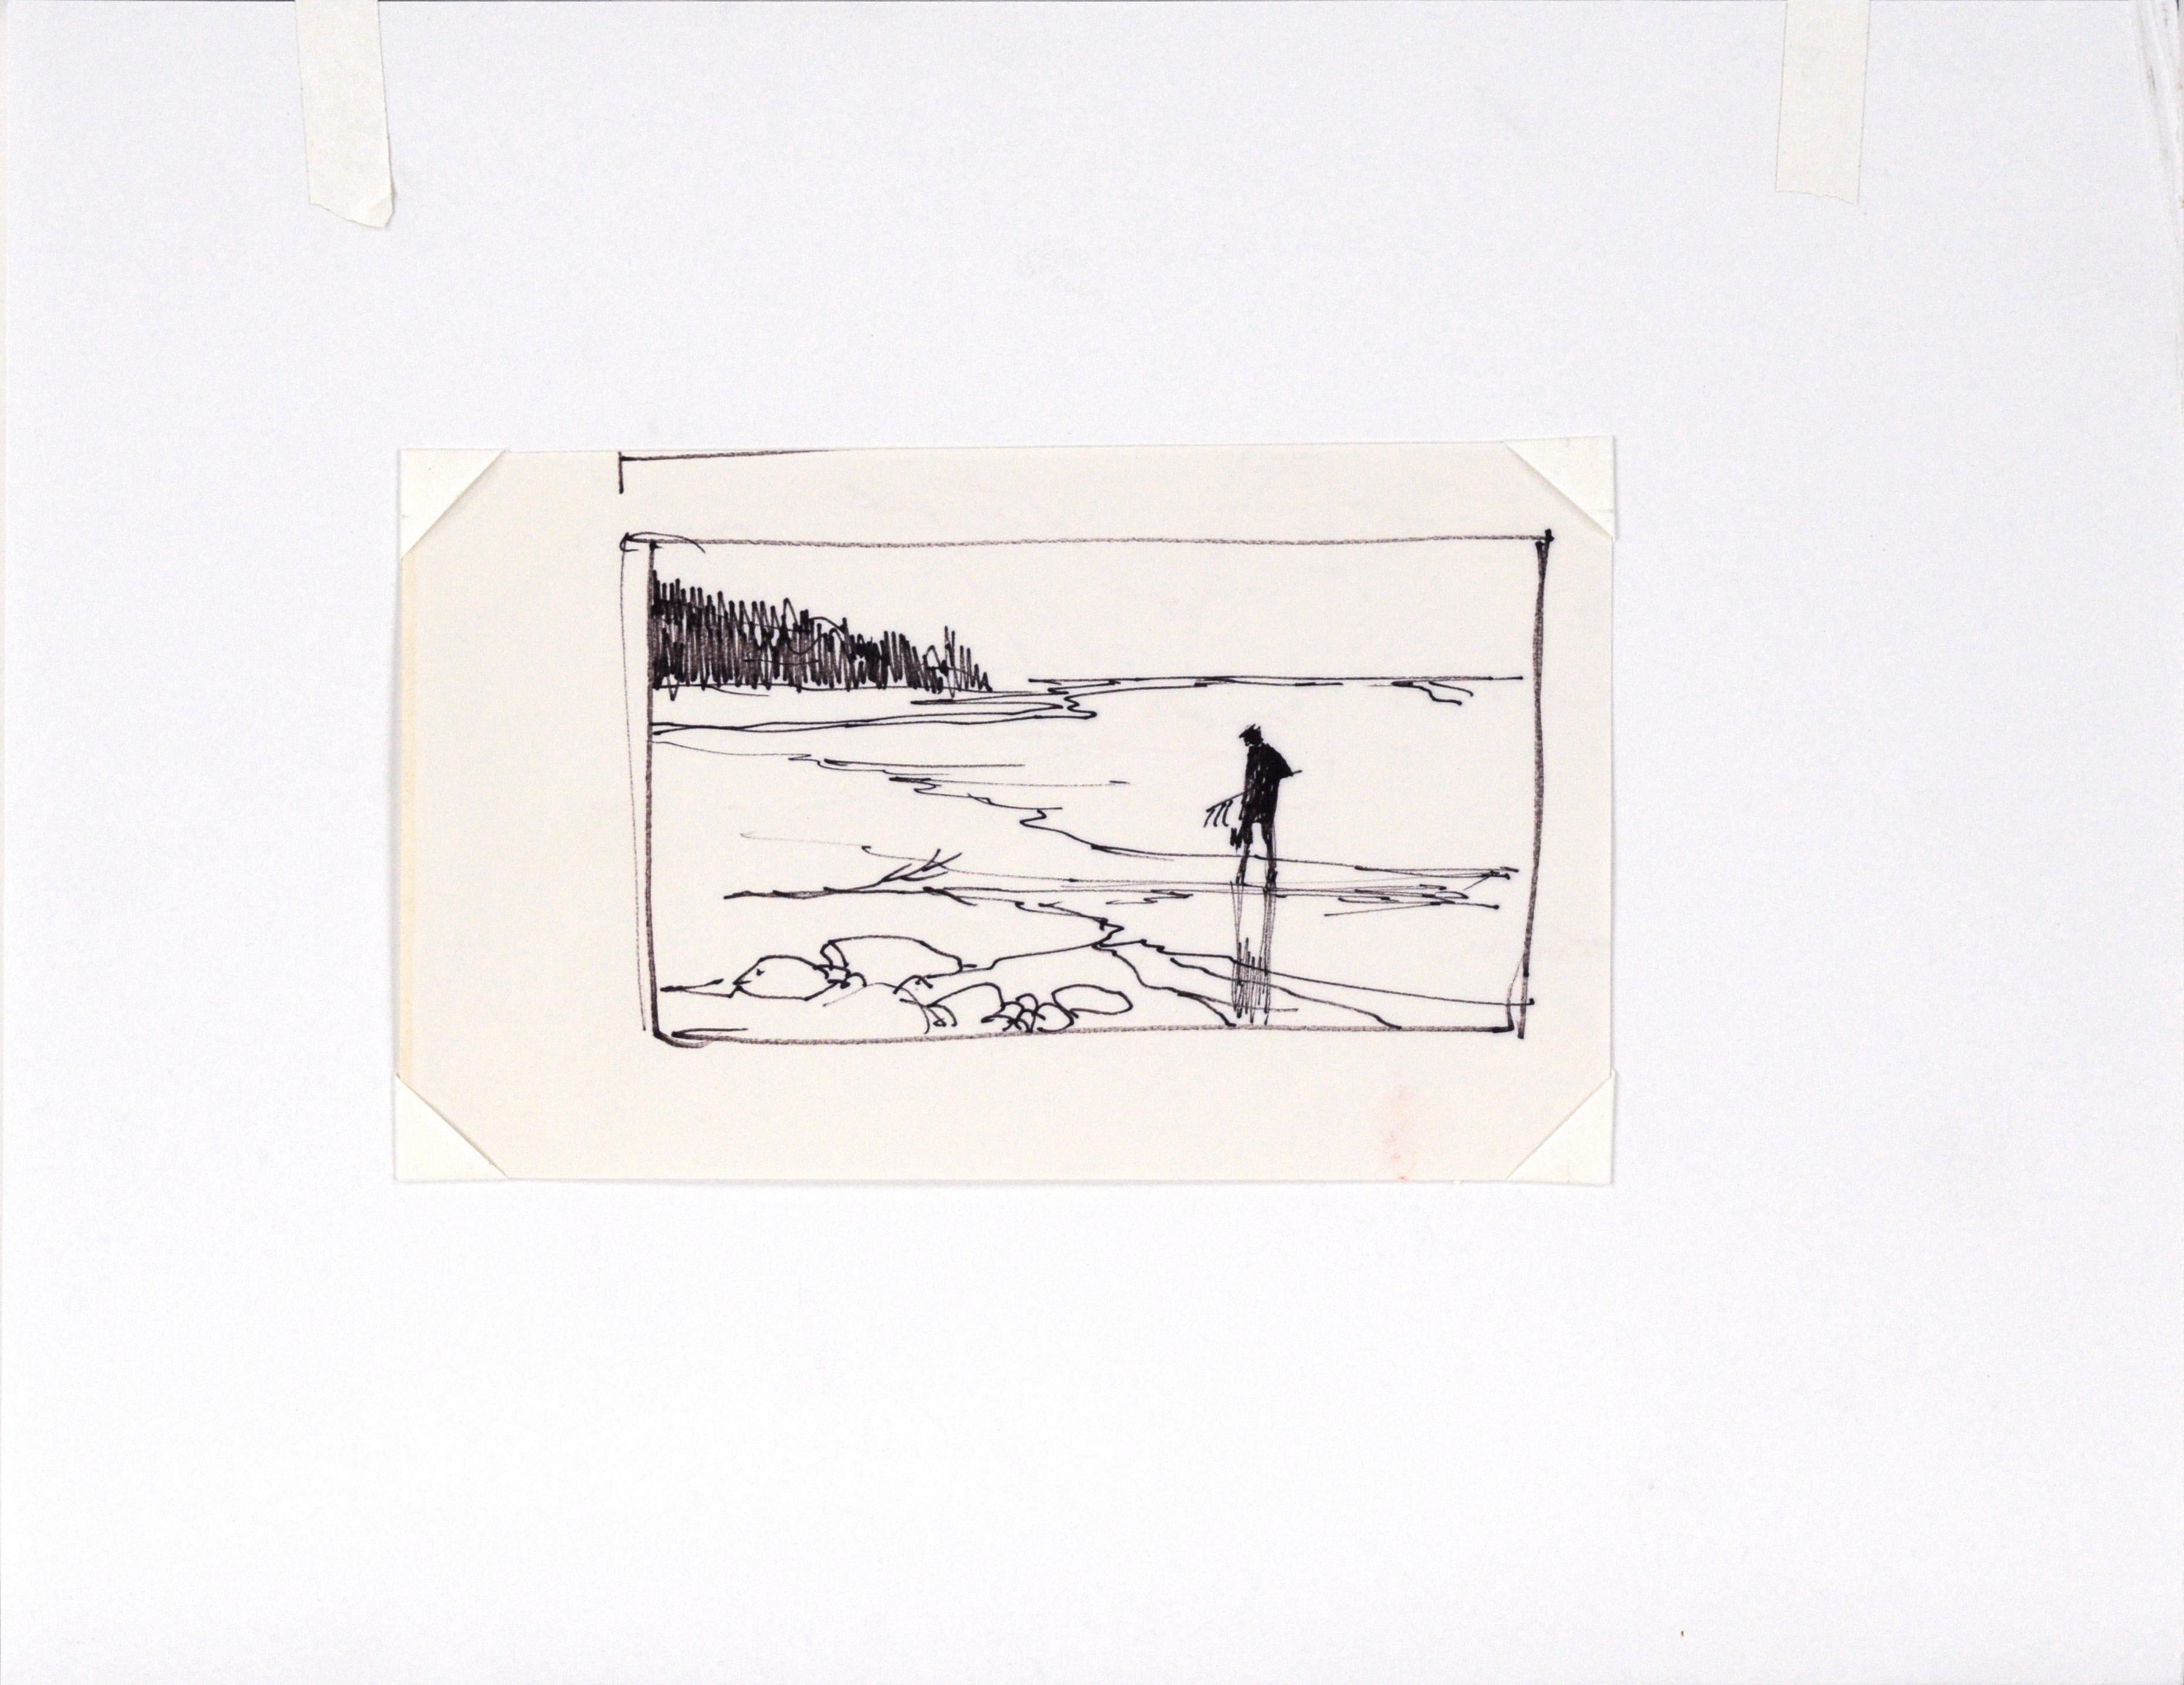 Beachcomber - Line Drawing Landscape in Ink on Paper

Bold landscape line drawing by listed Maine artist Laurence Sisson (American, 1928-2015). A lone figure walks a shoreline carrying a tool towards a line of trees stretching towards the water. 